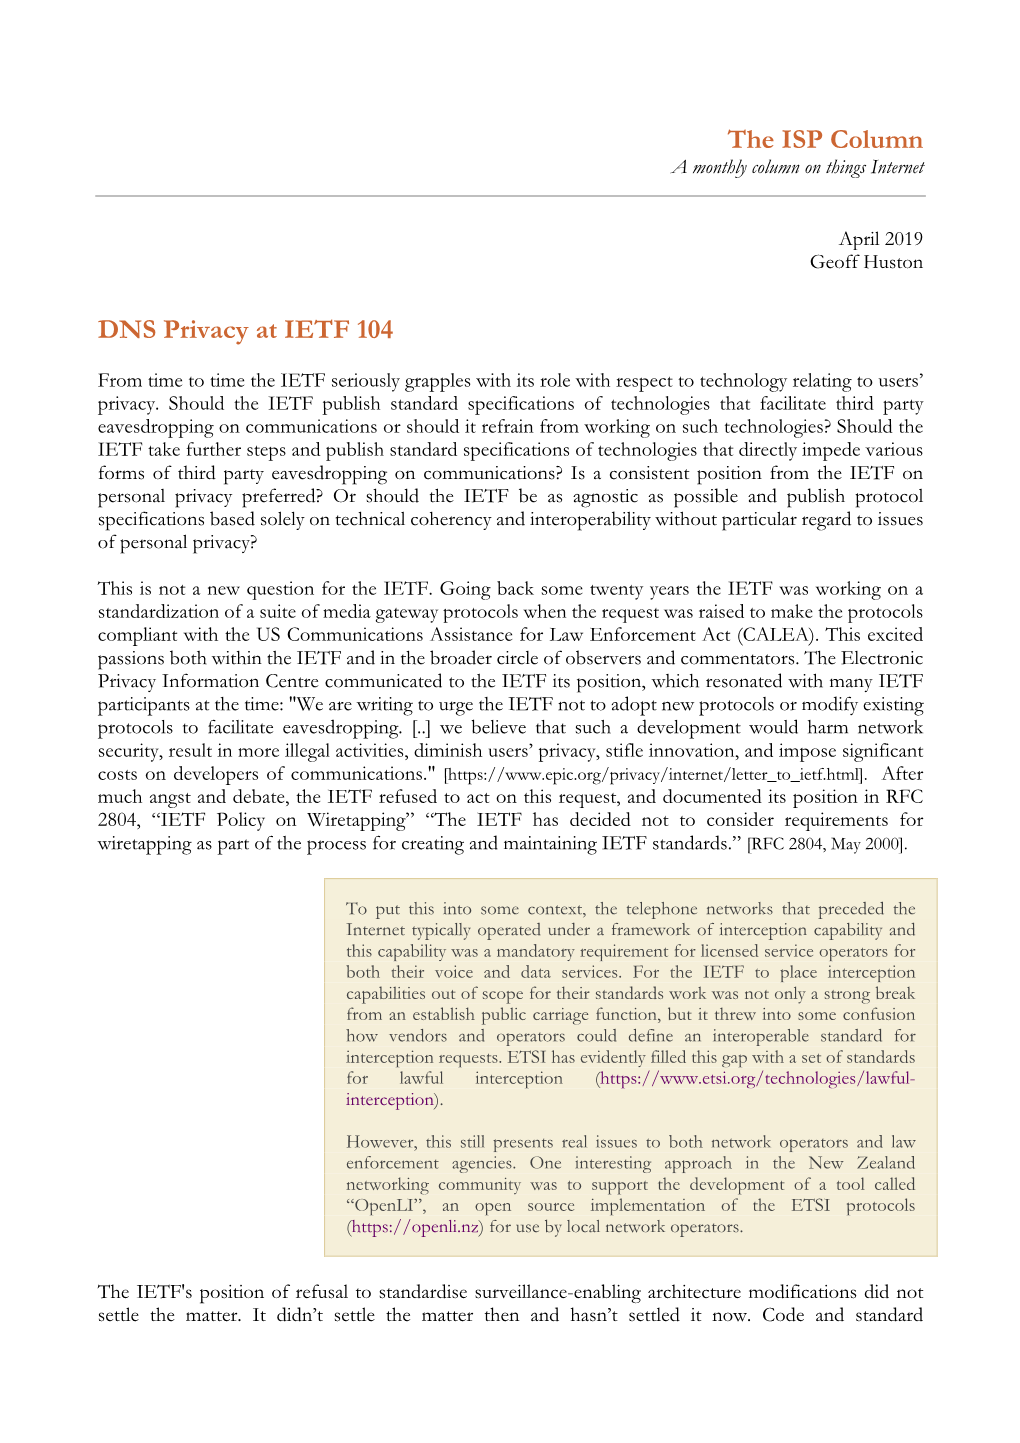 The ISP Column DNS Privacy at IETF